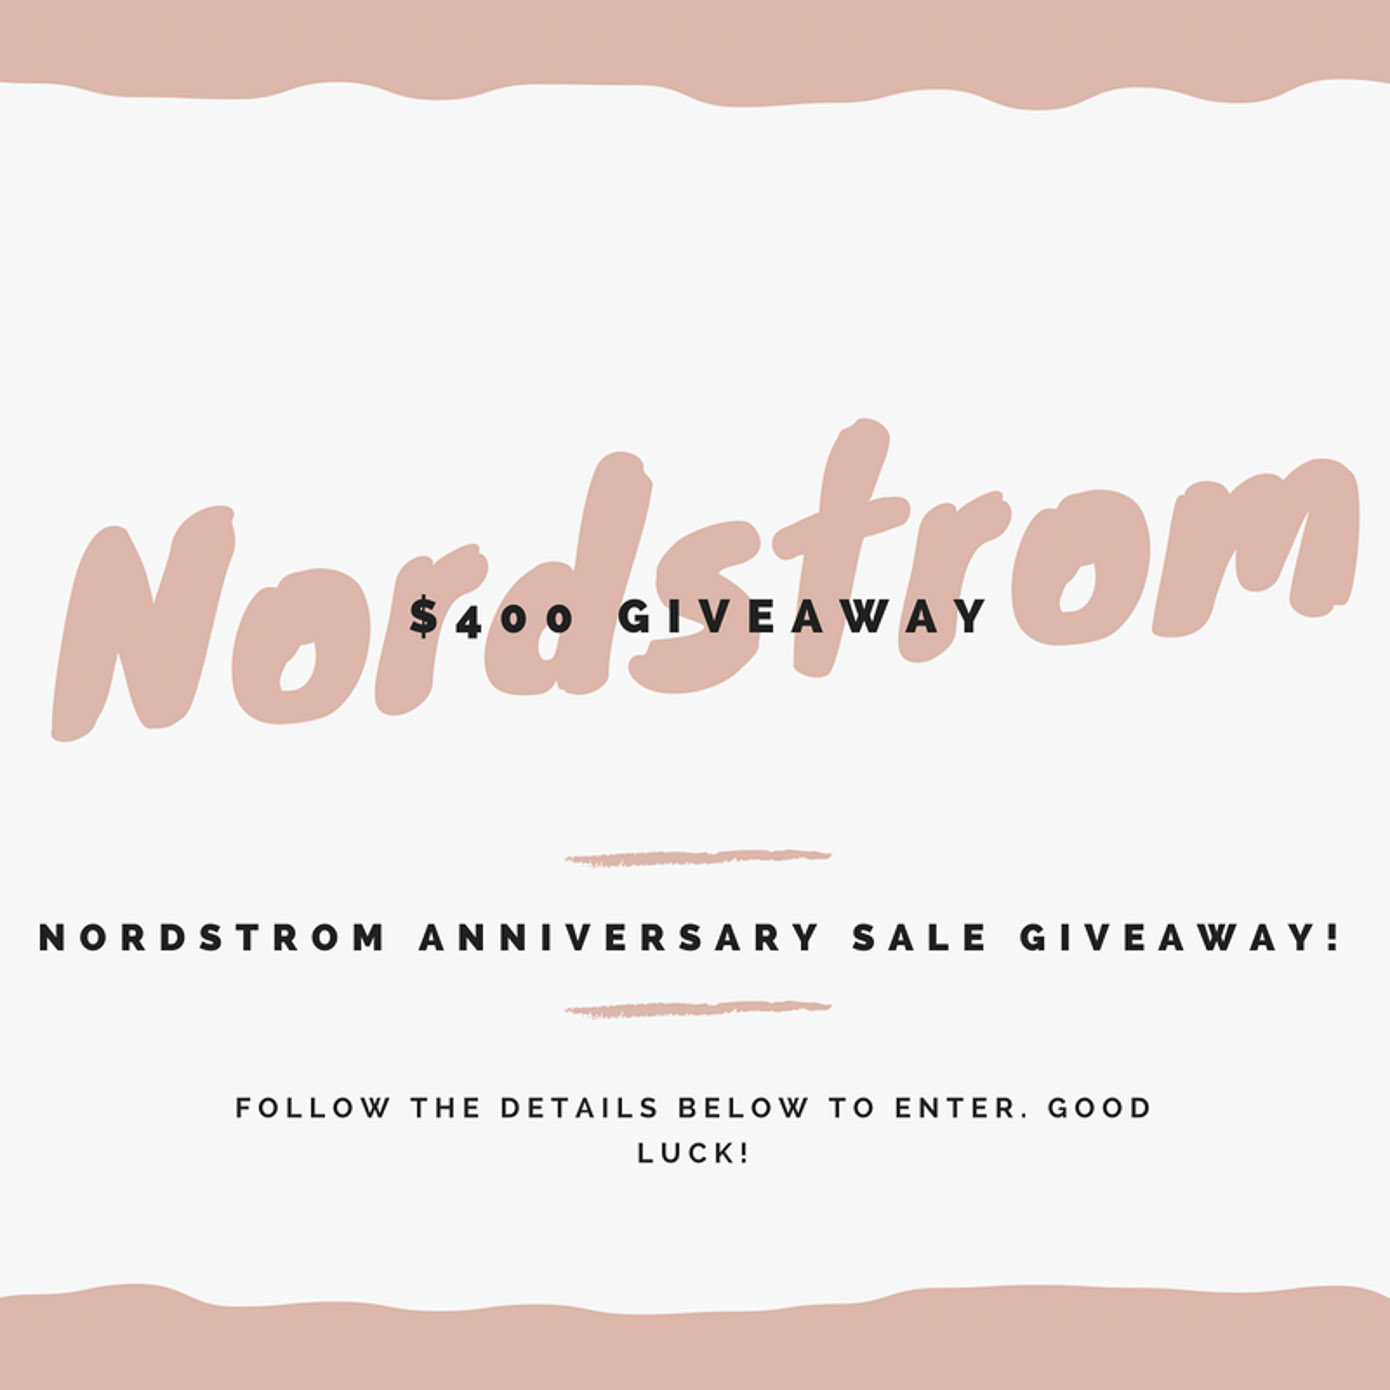 Nordstrom Anniversary Sale $400 Giveaway 